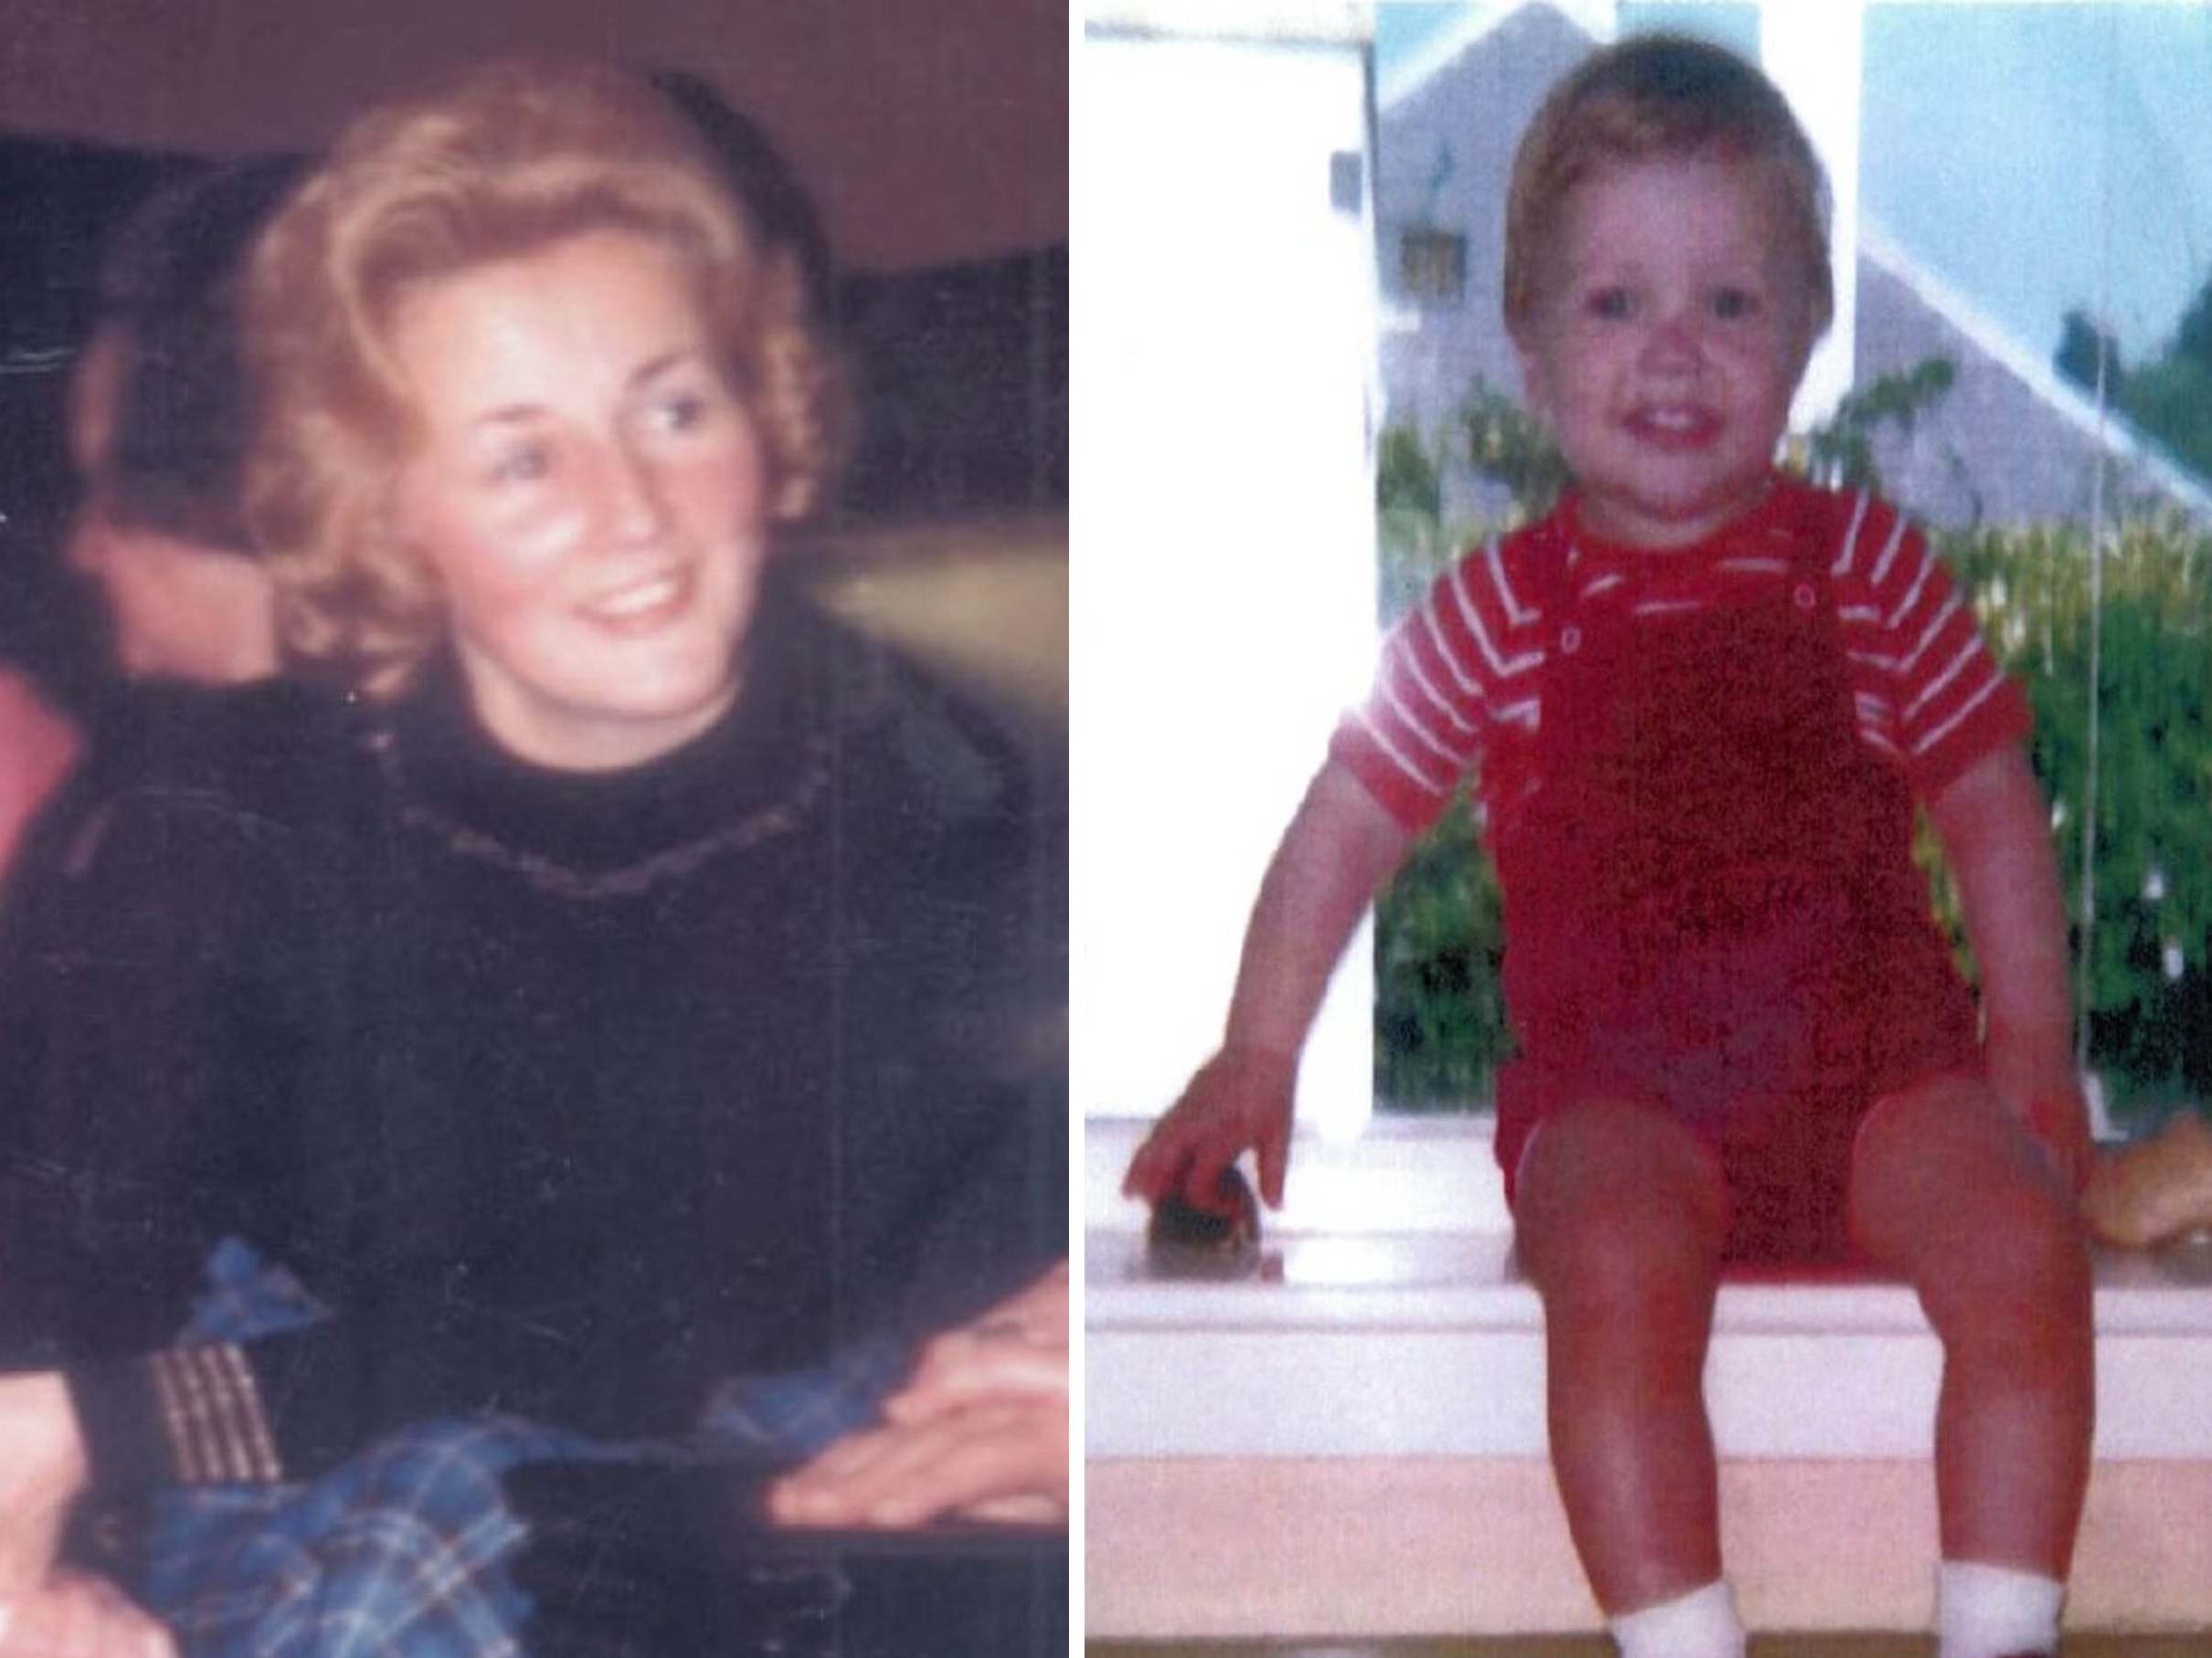 Renee MacRae and her son Andrew disappeared without trace on 12 November 1976